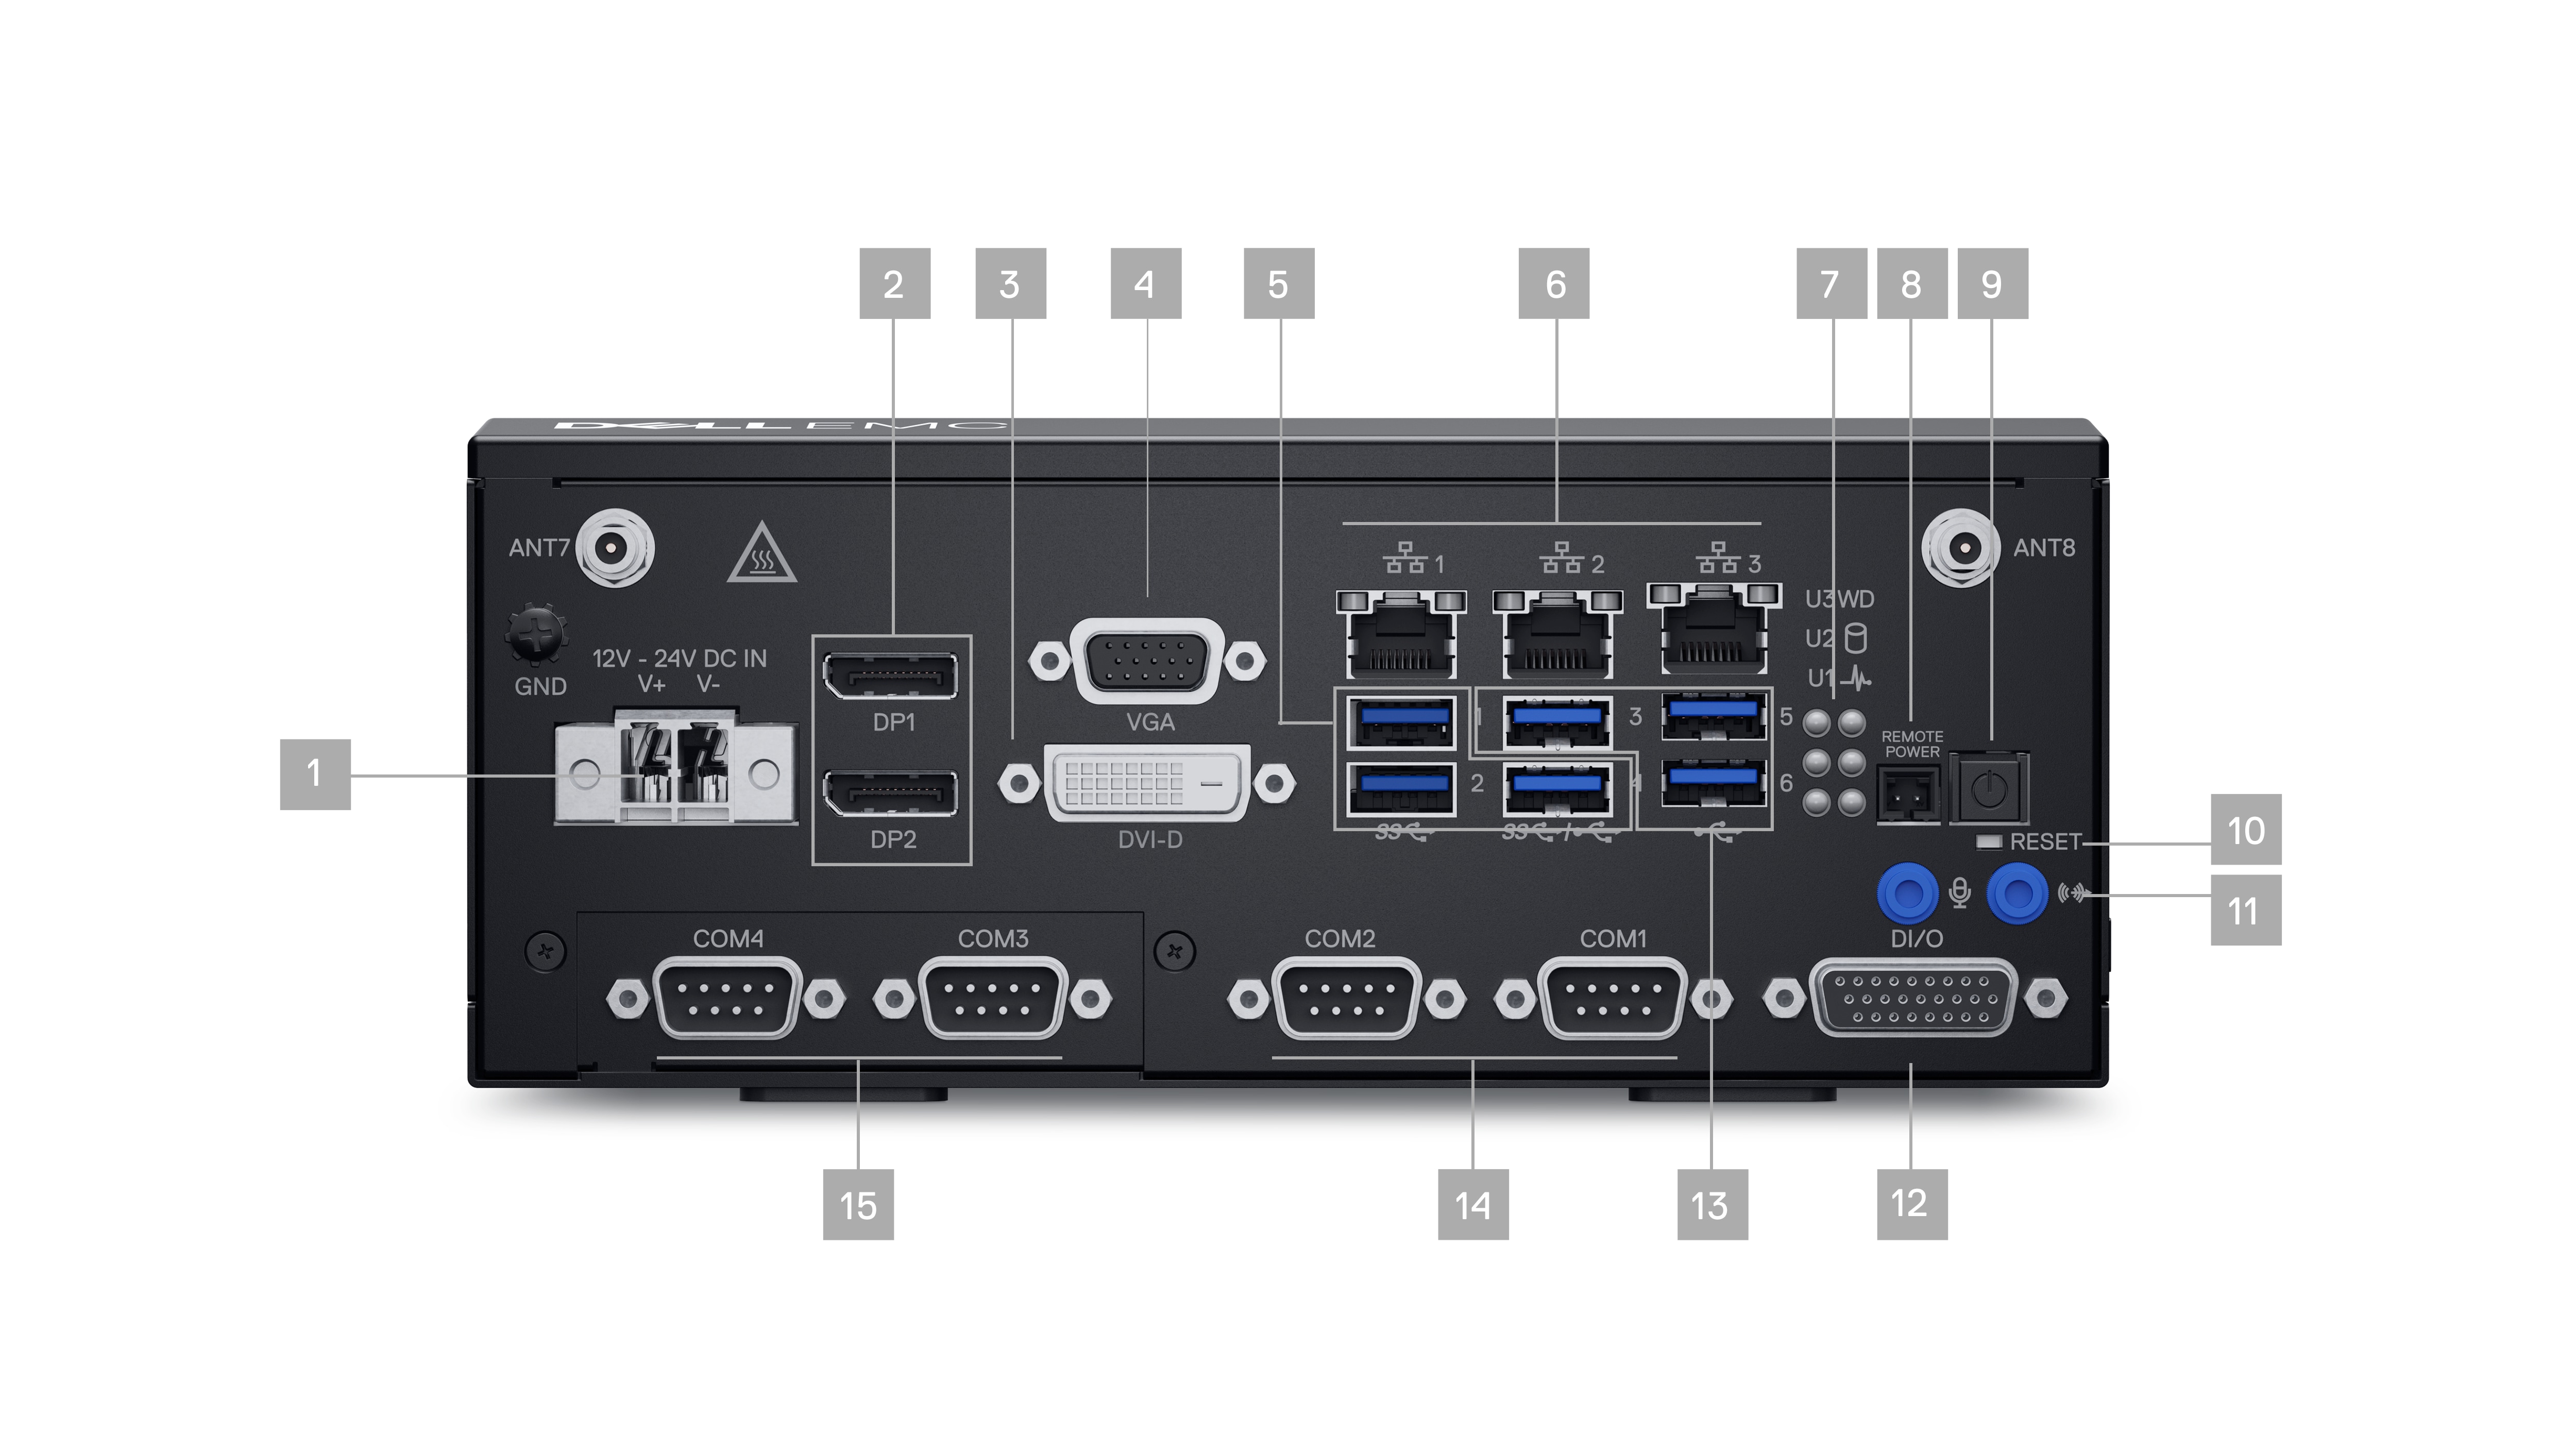 Picture of Dell EMC Edge Gateway 5200 with its back visible and numbers from 1 to 15 signaling the 15 ports & slots.